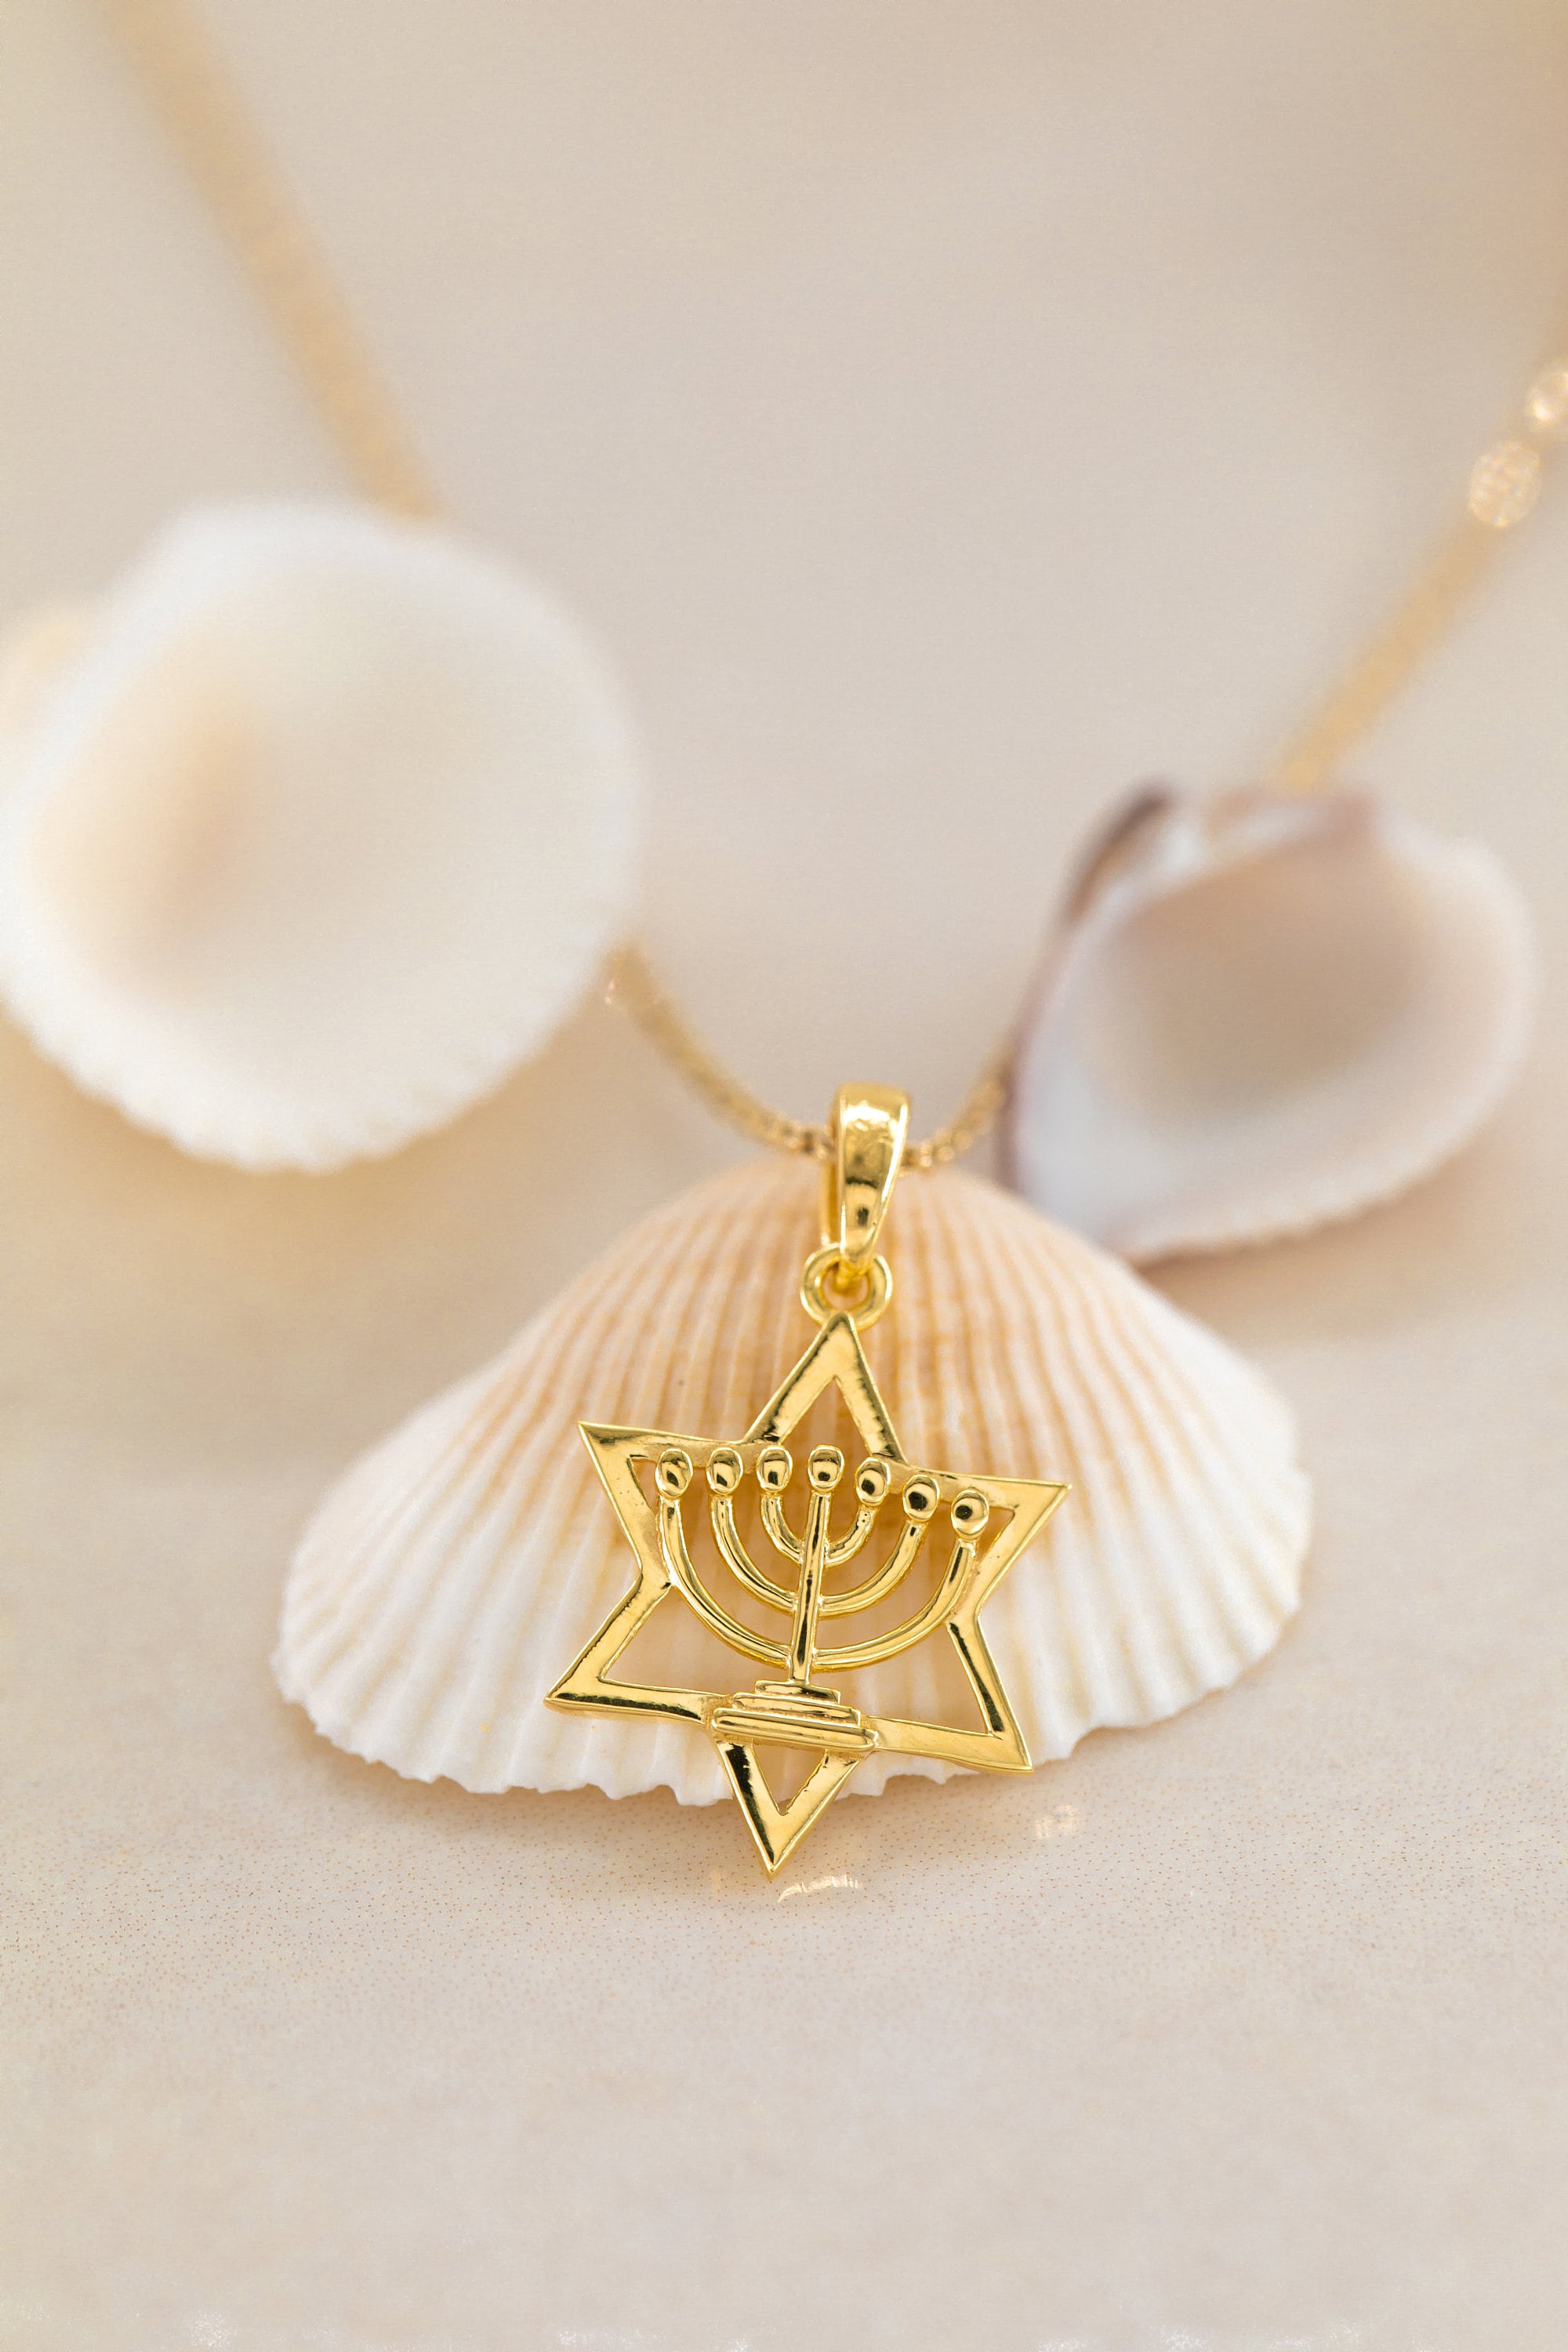 14K Star of David Necklace, Judaism's Iconic Symbol, David Necklace Geometry Necklace, Gold Judaica Jewelry, Silver Star Of David Necklace